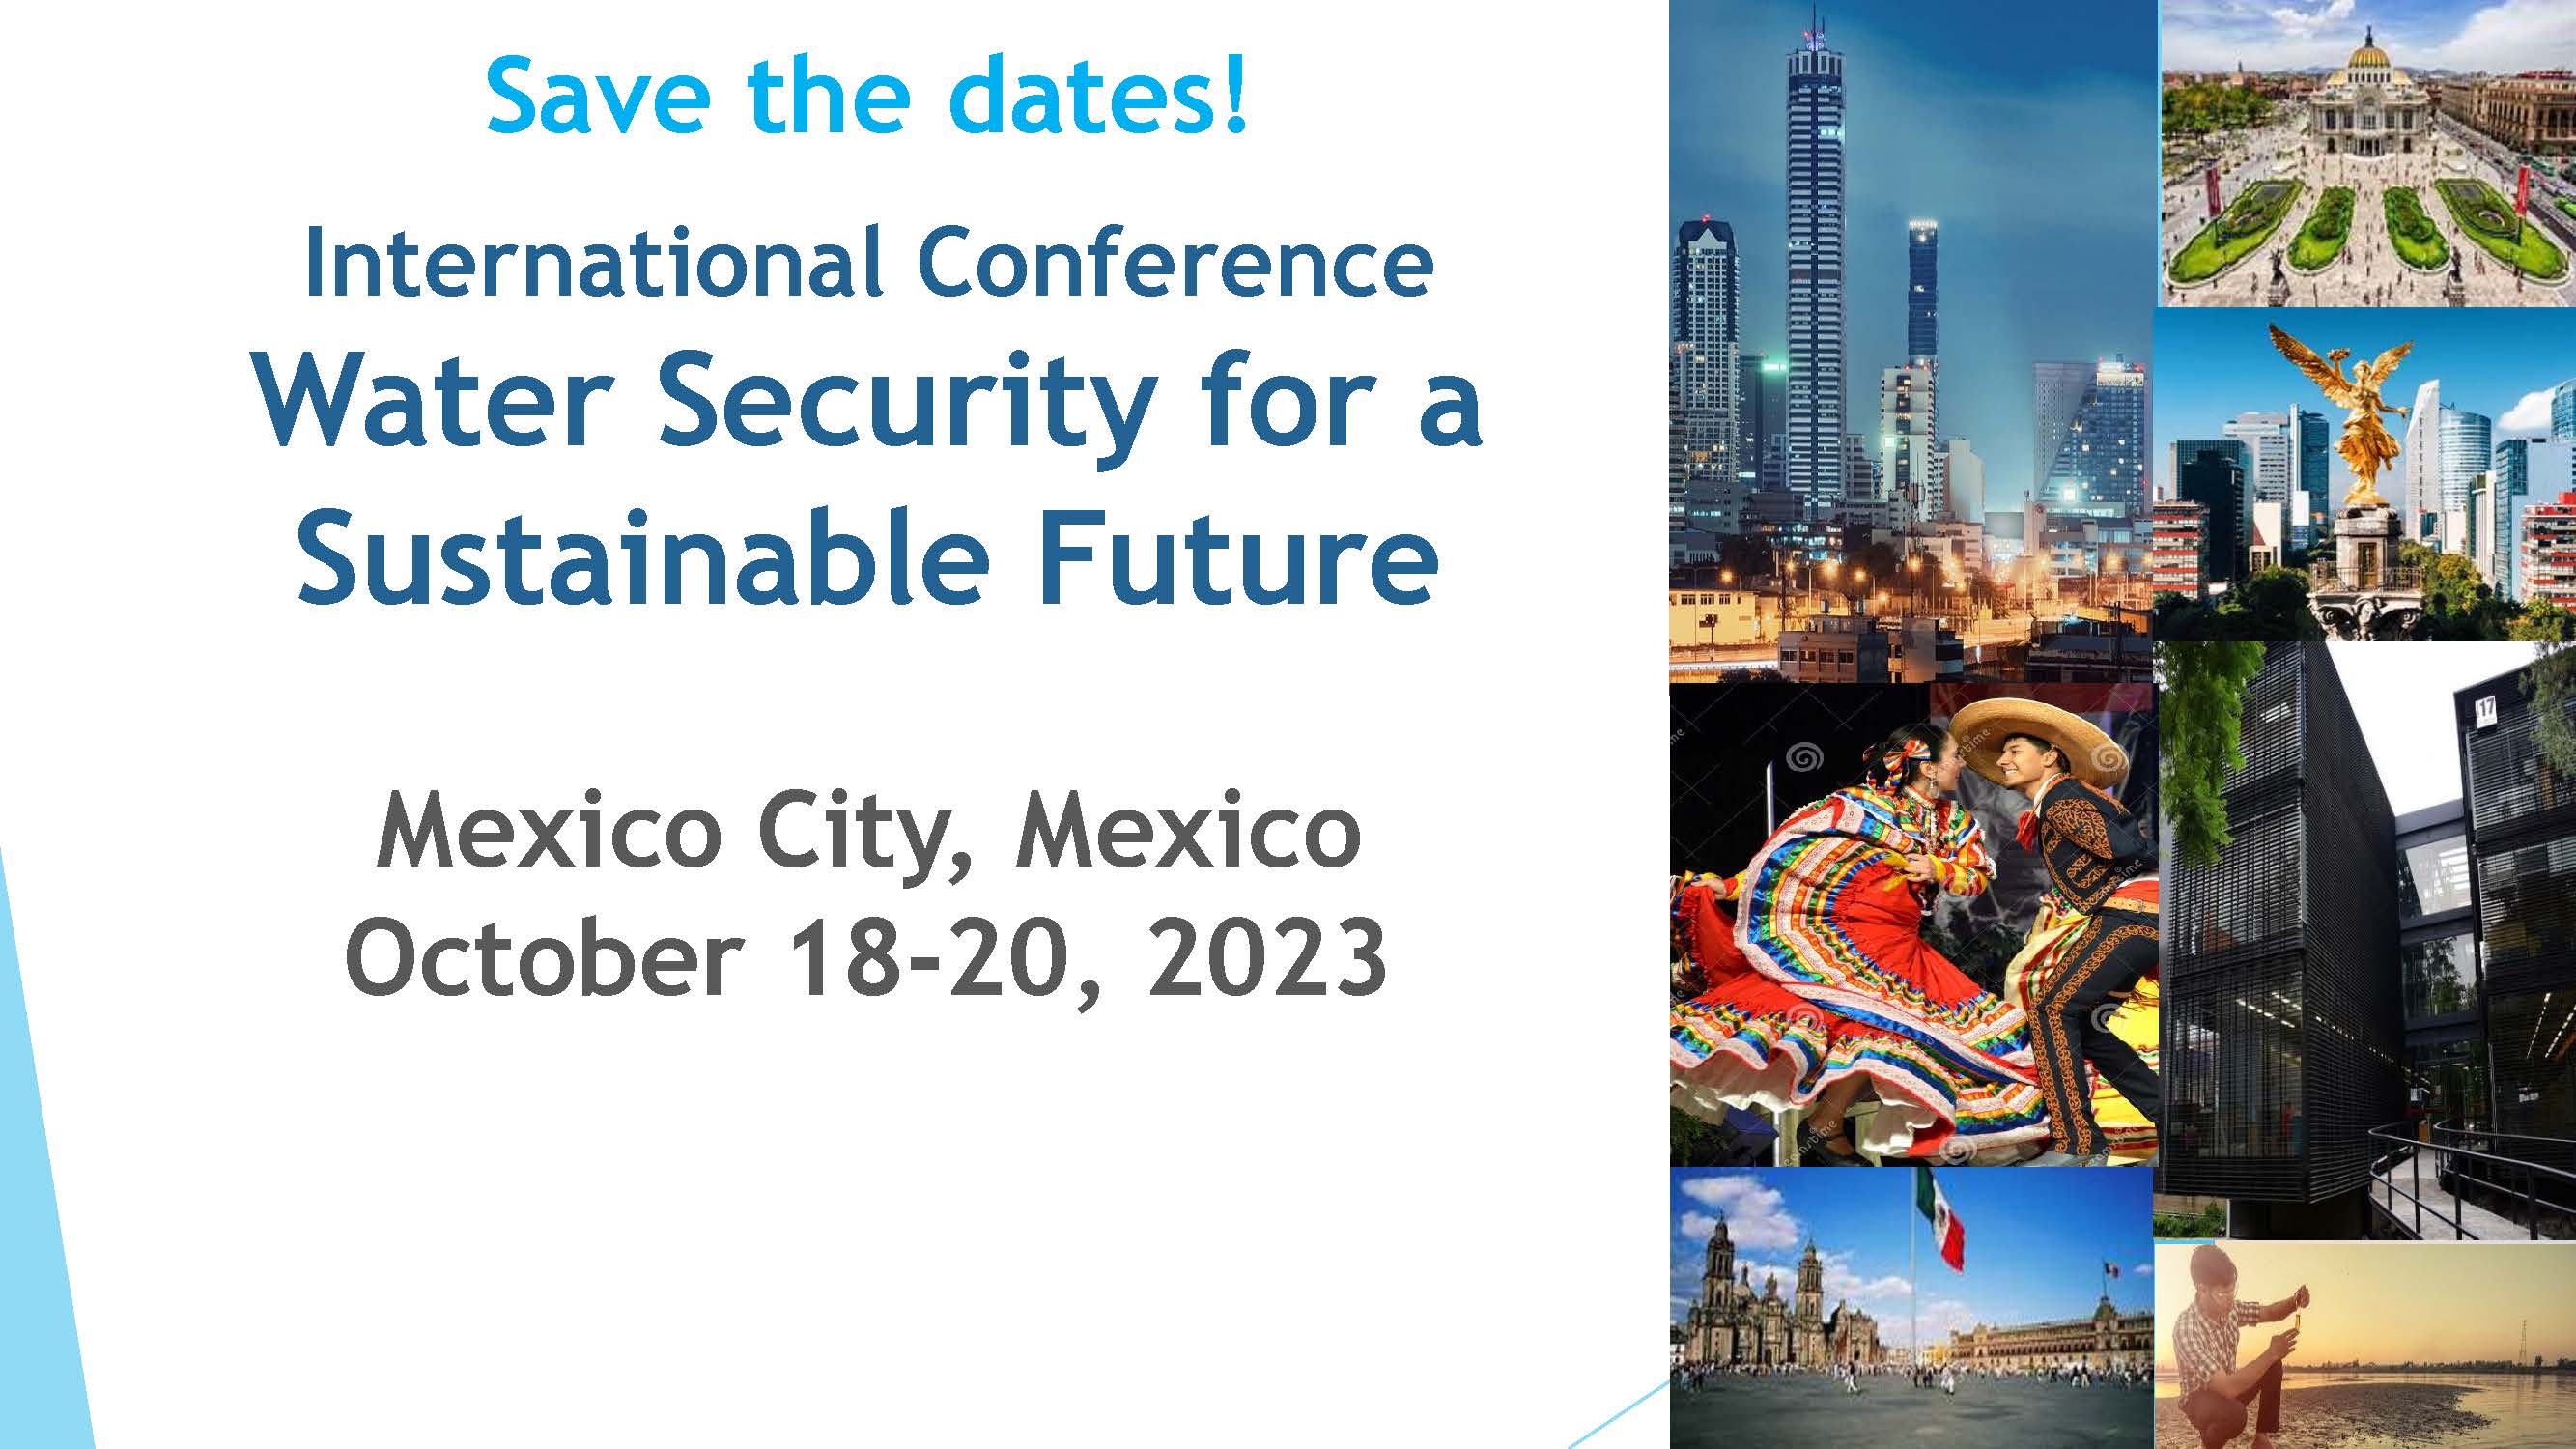 save-the-date-for-website_conference-2023_mexico.jpg